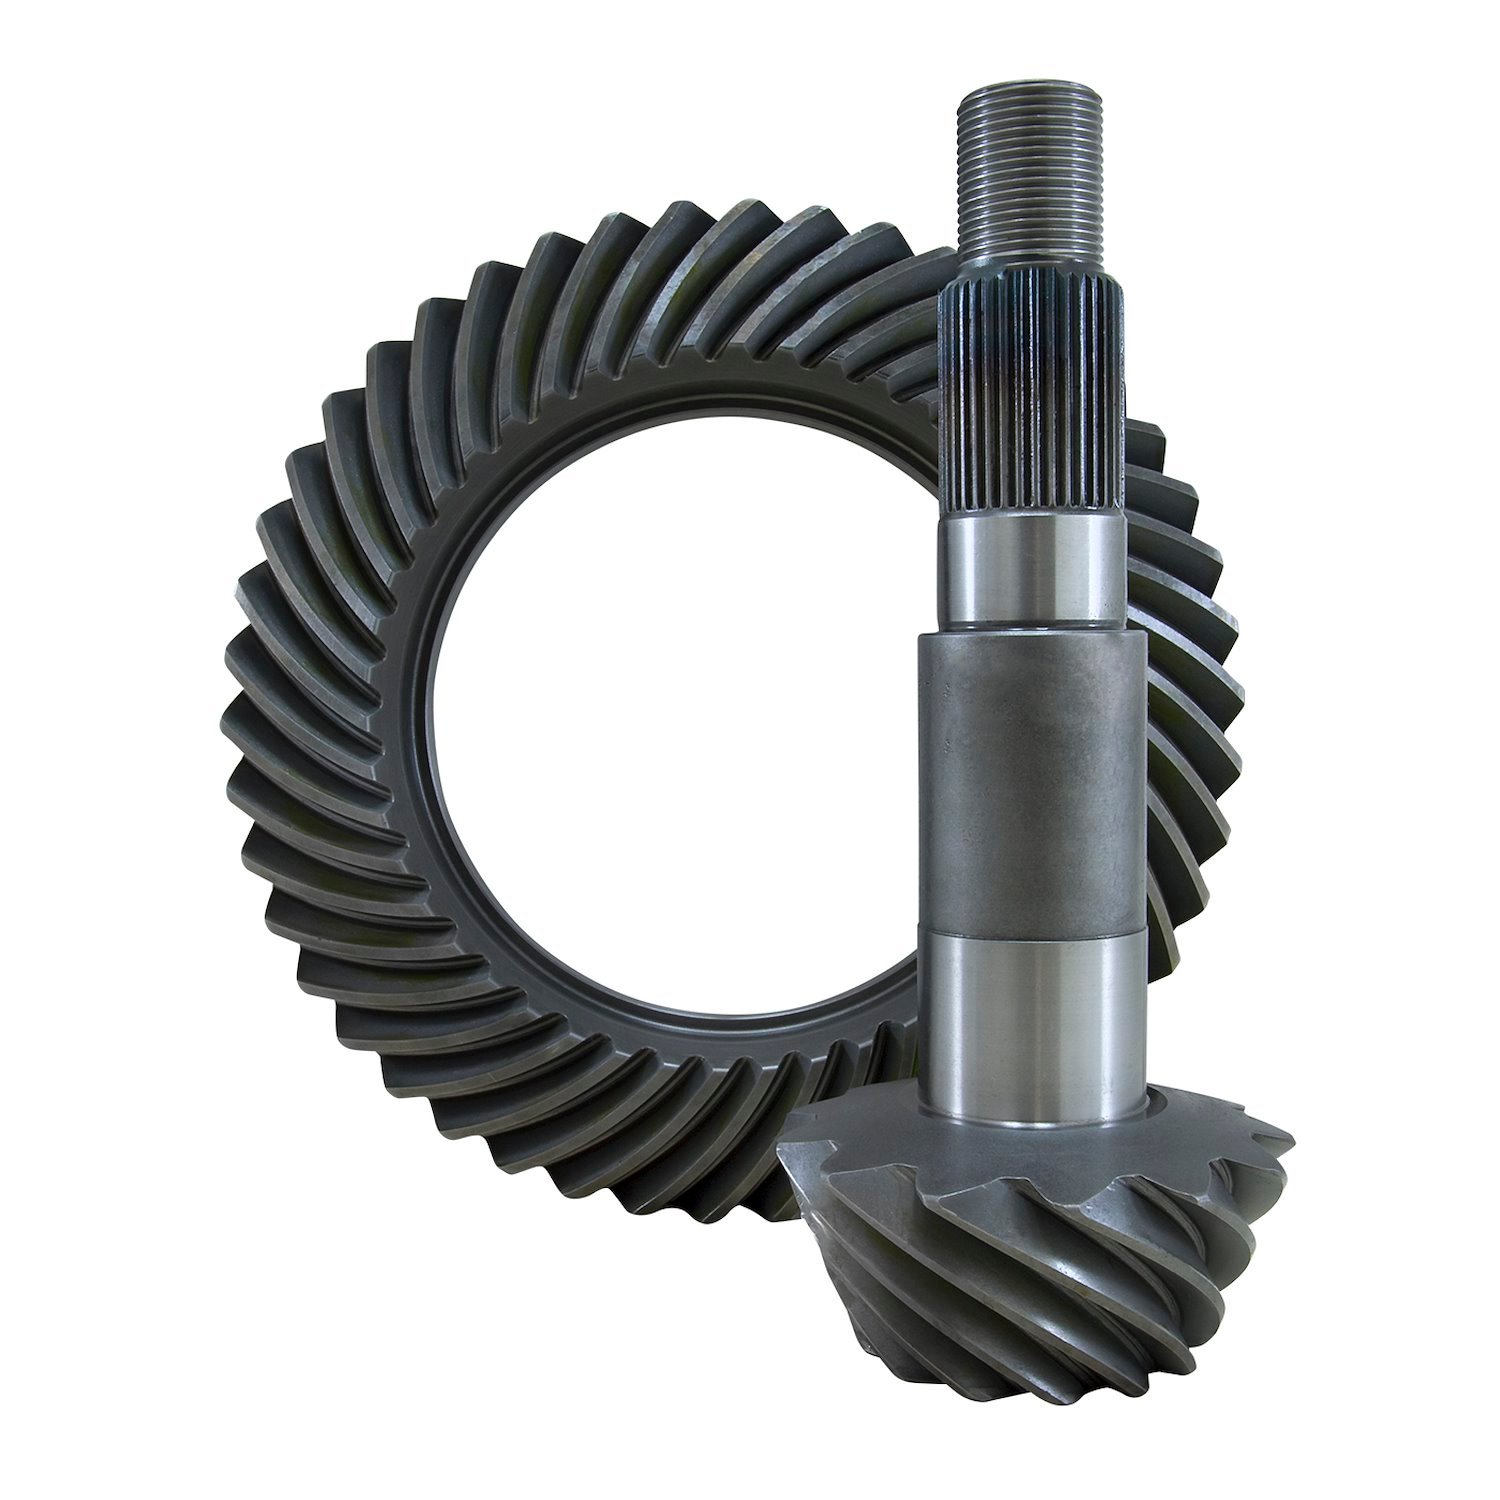 USA Standard 36093 Ring & Pinion Set, For Dana 80, 3.73 Ratio, Thin, For 4.10 & Up Case